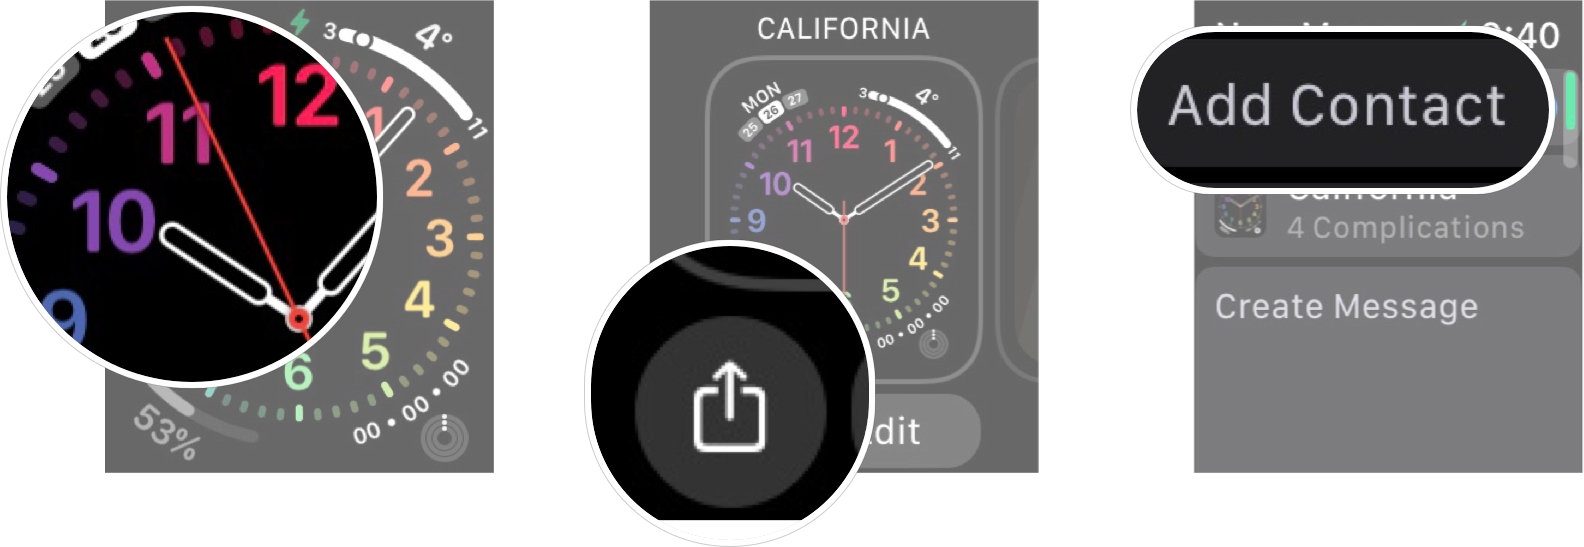 Share A Watch Face On Apple Watch: Long press the watch face you want to share, tap the share button, and then tap add contact.